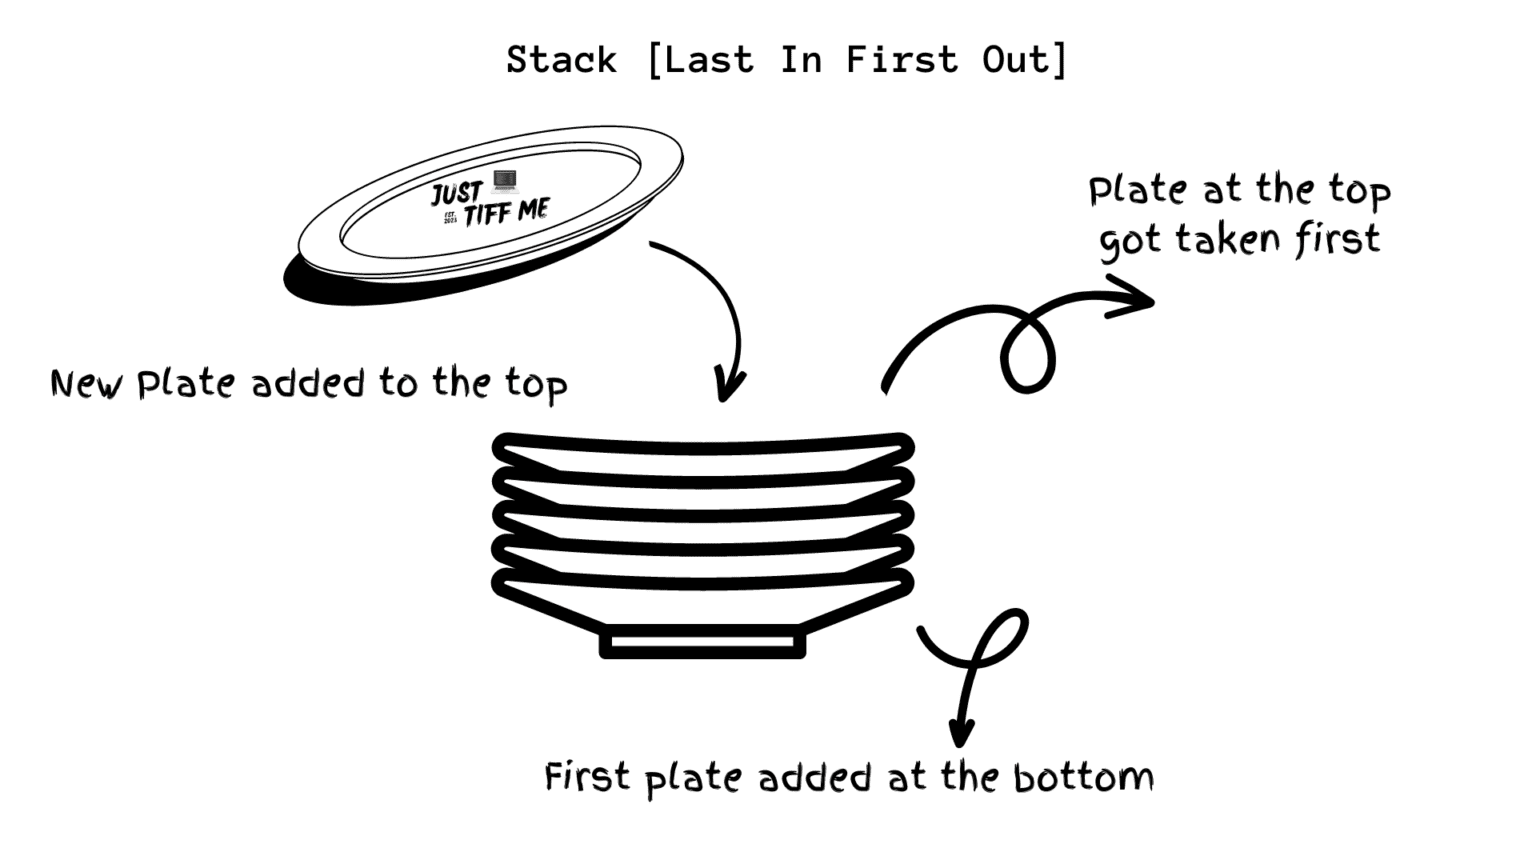 stack data structure operations: pile of stack analogy